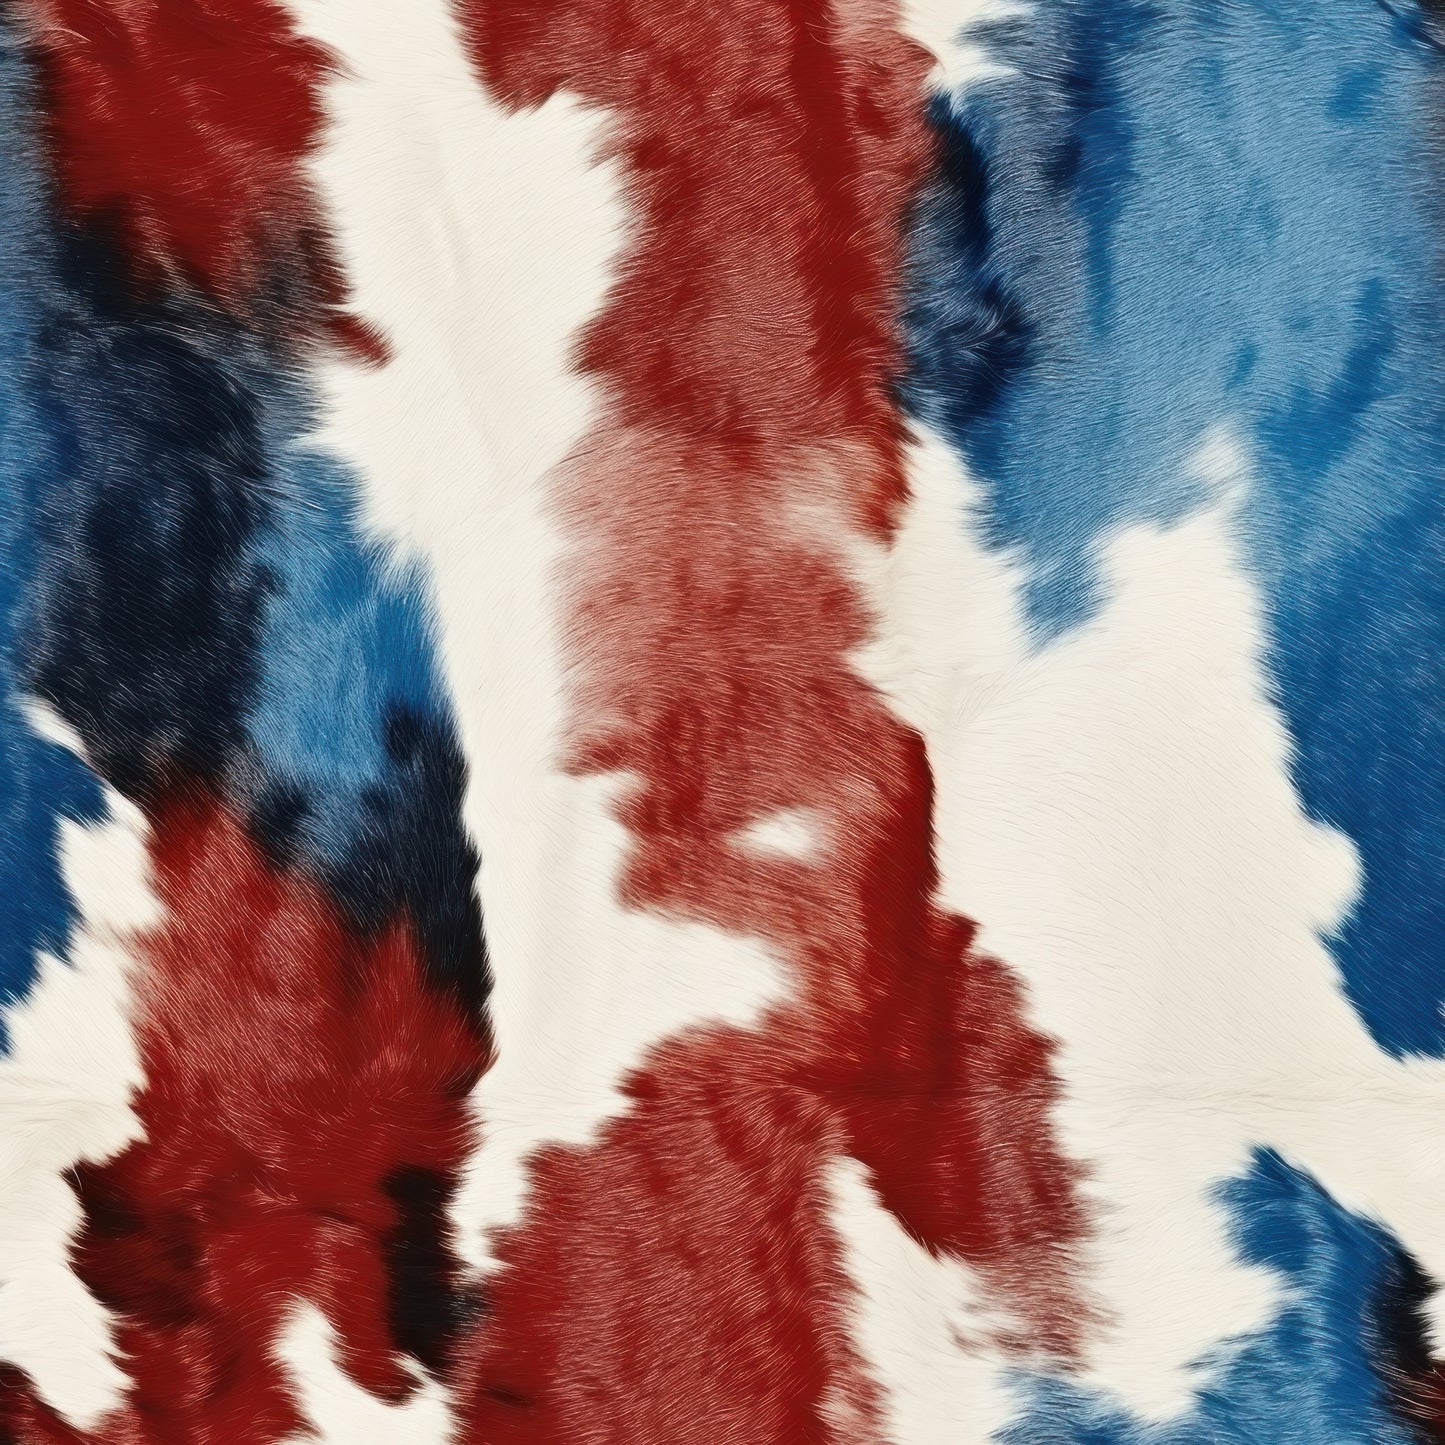 RED, WHITE AND BLUE COWHIDE VINYL - MULTIPLE VARIATIONS